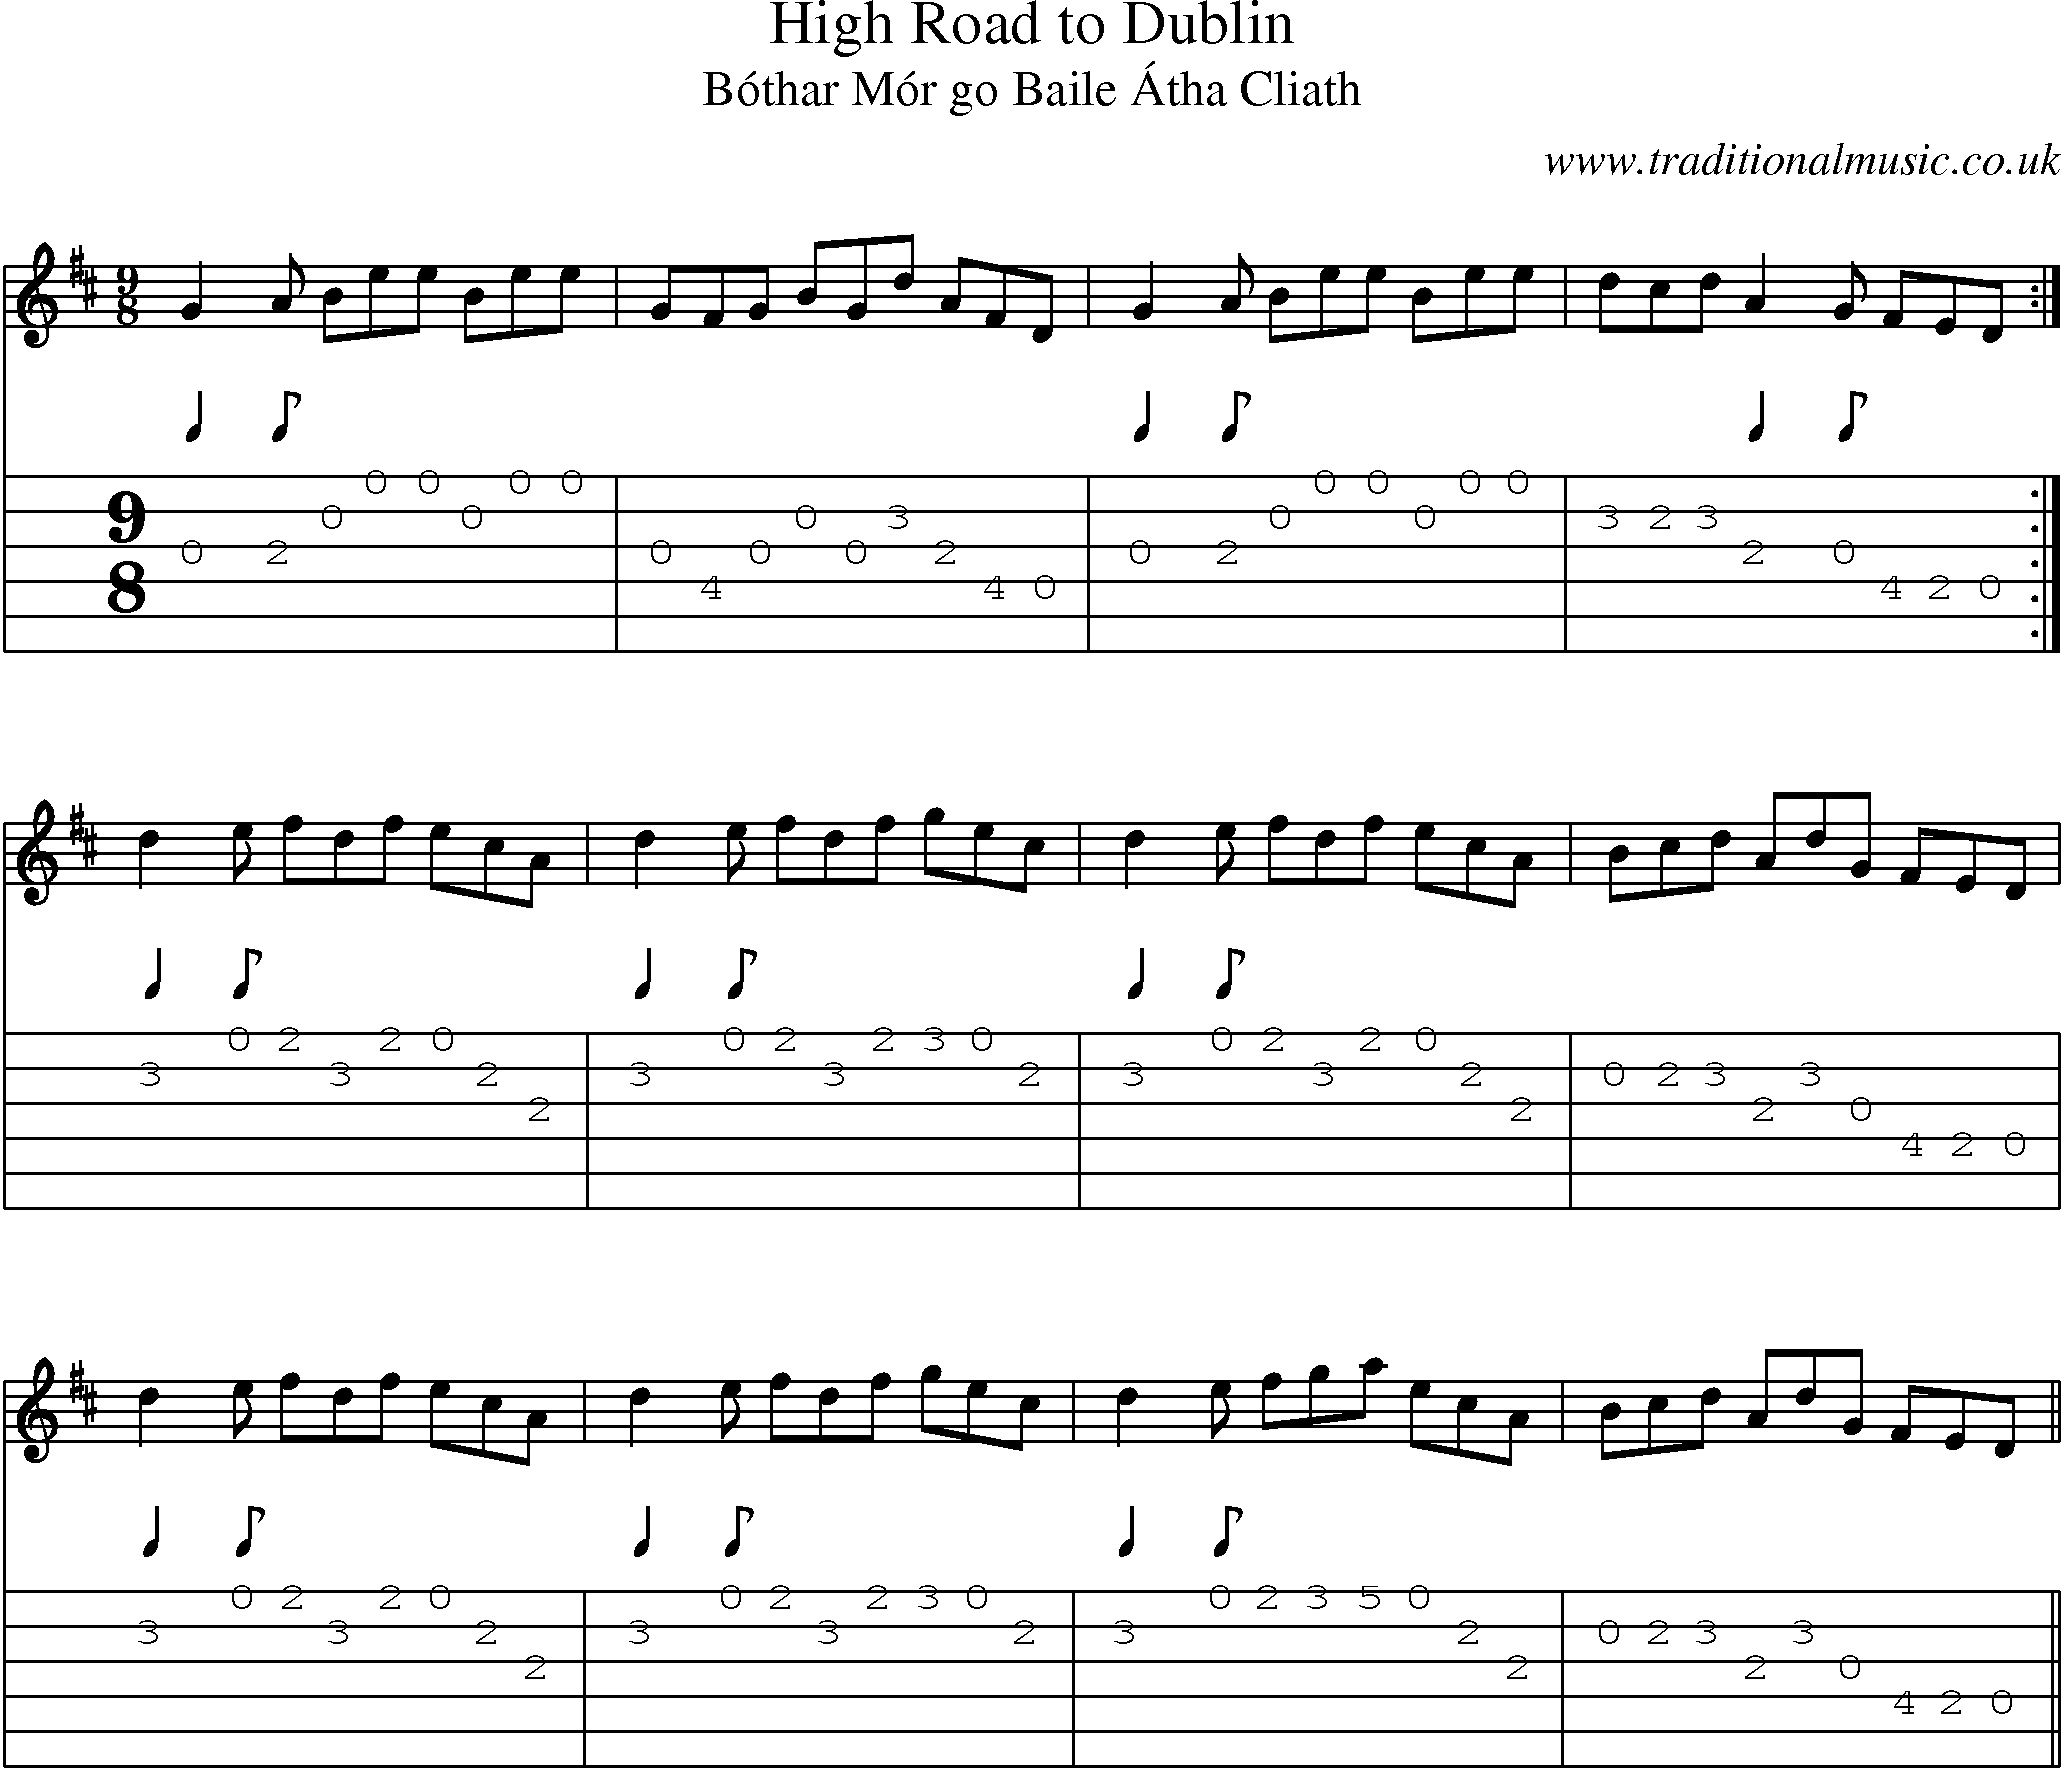 Music Score and Guitar Tabs for High Road To Dublin